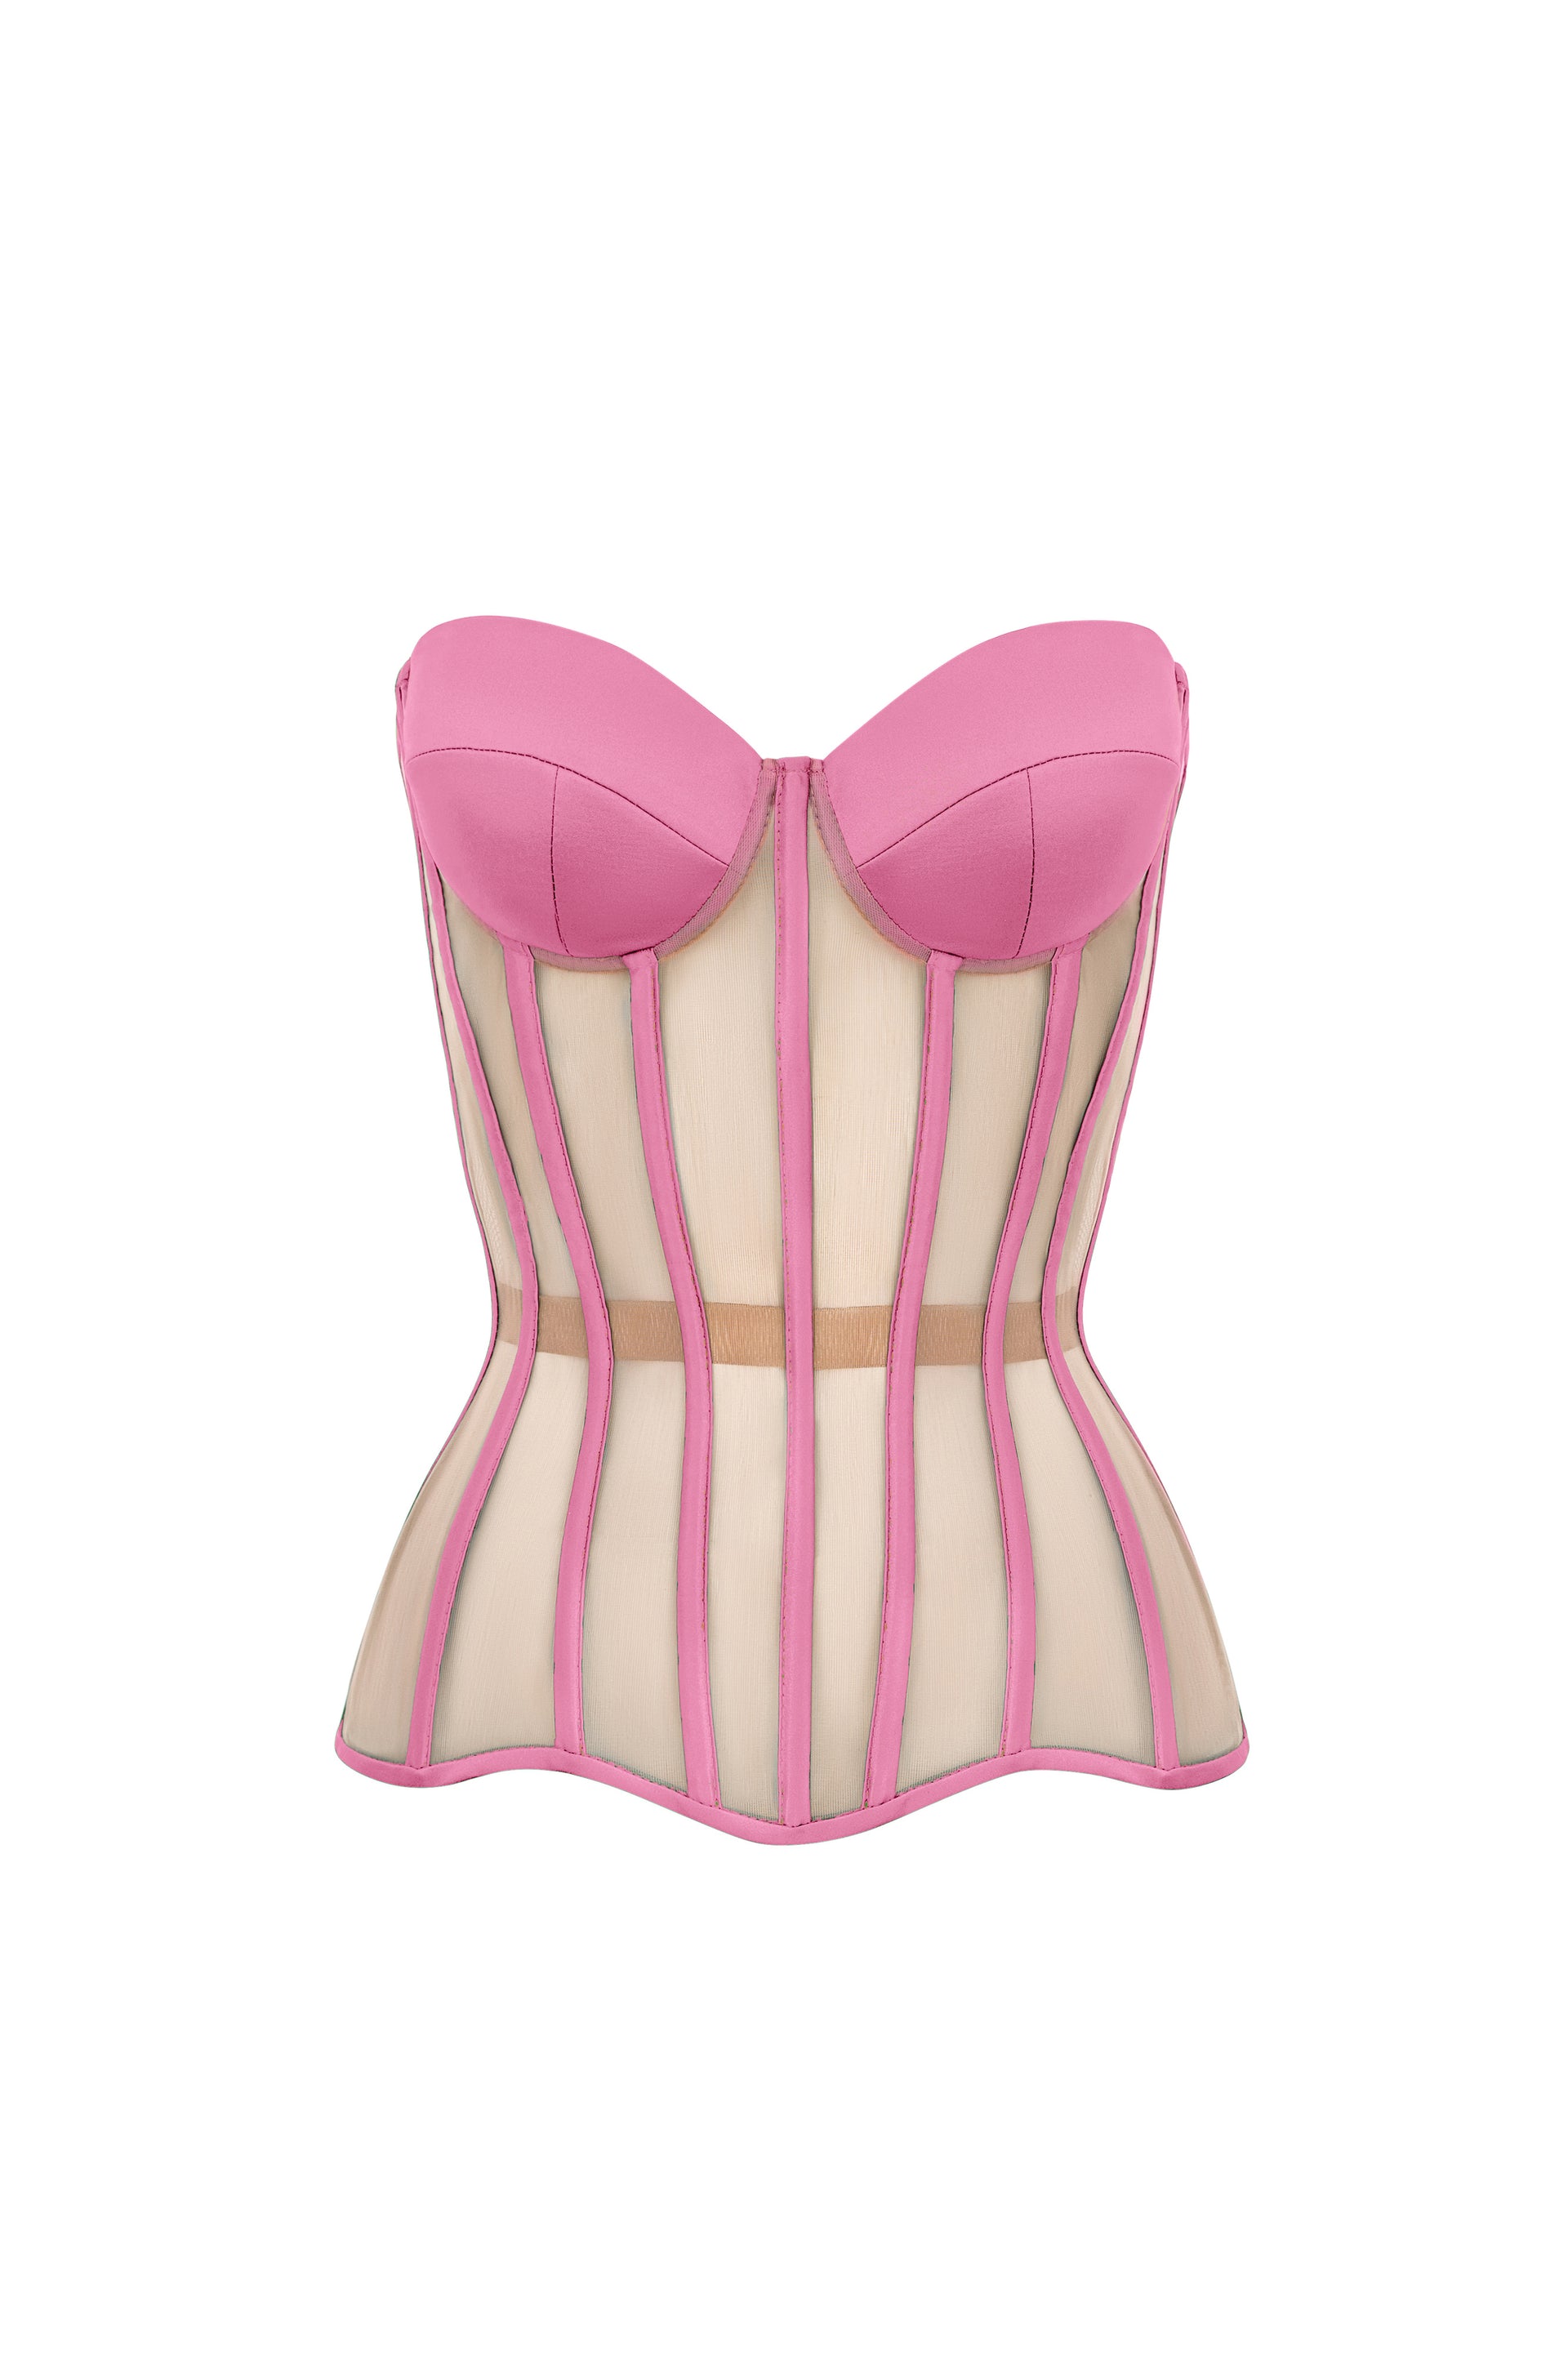 Pink corset with reliefs and satin cups